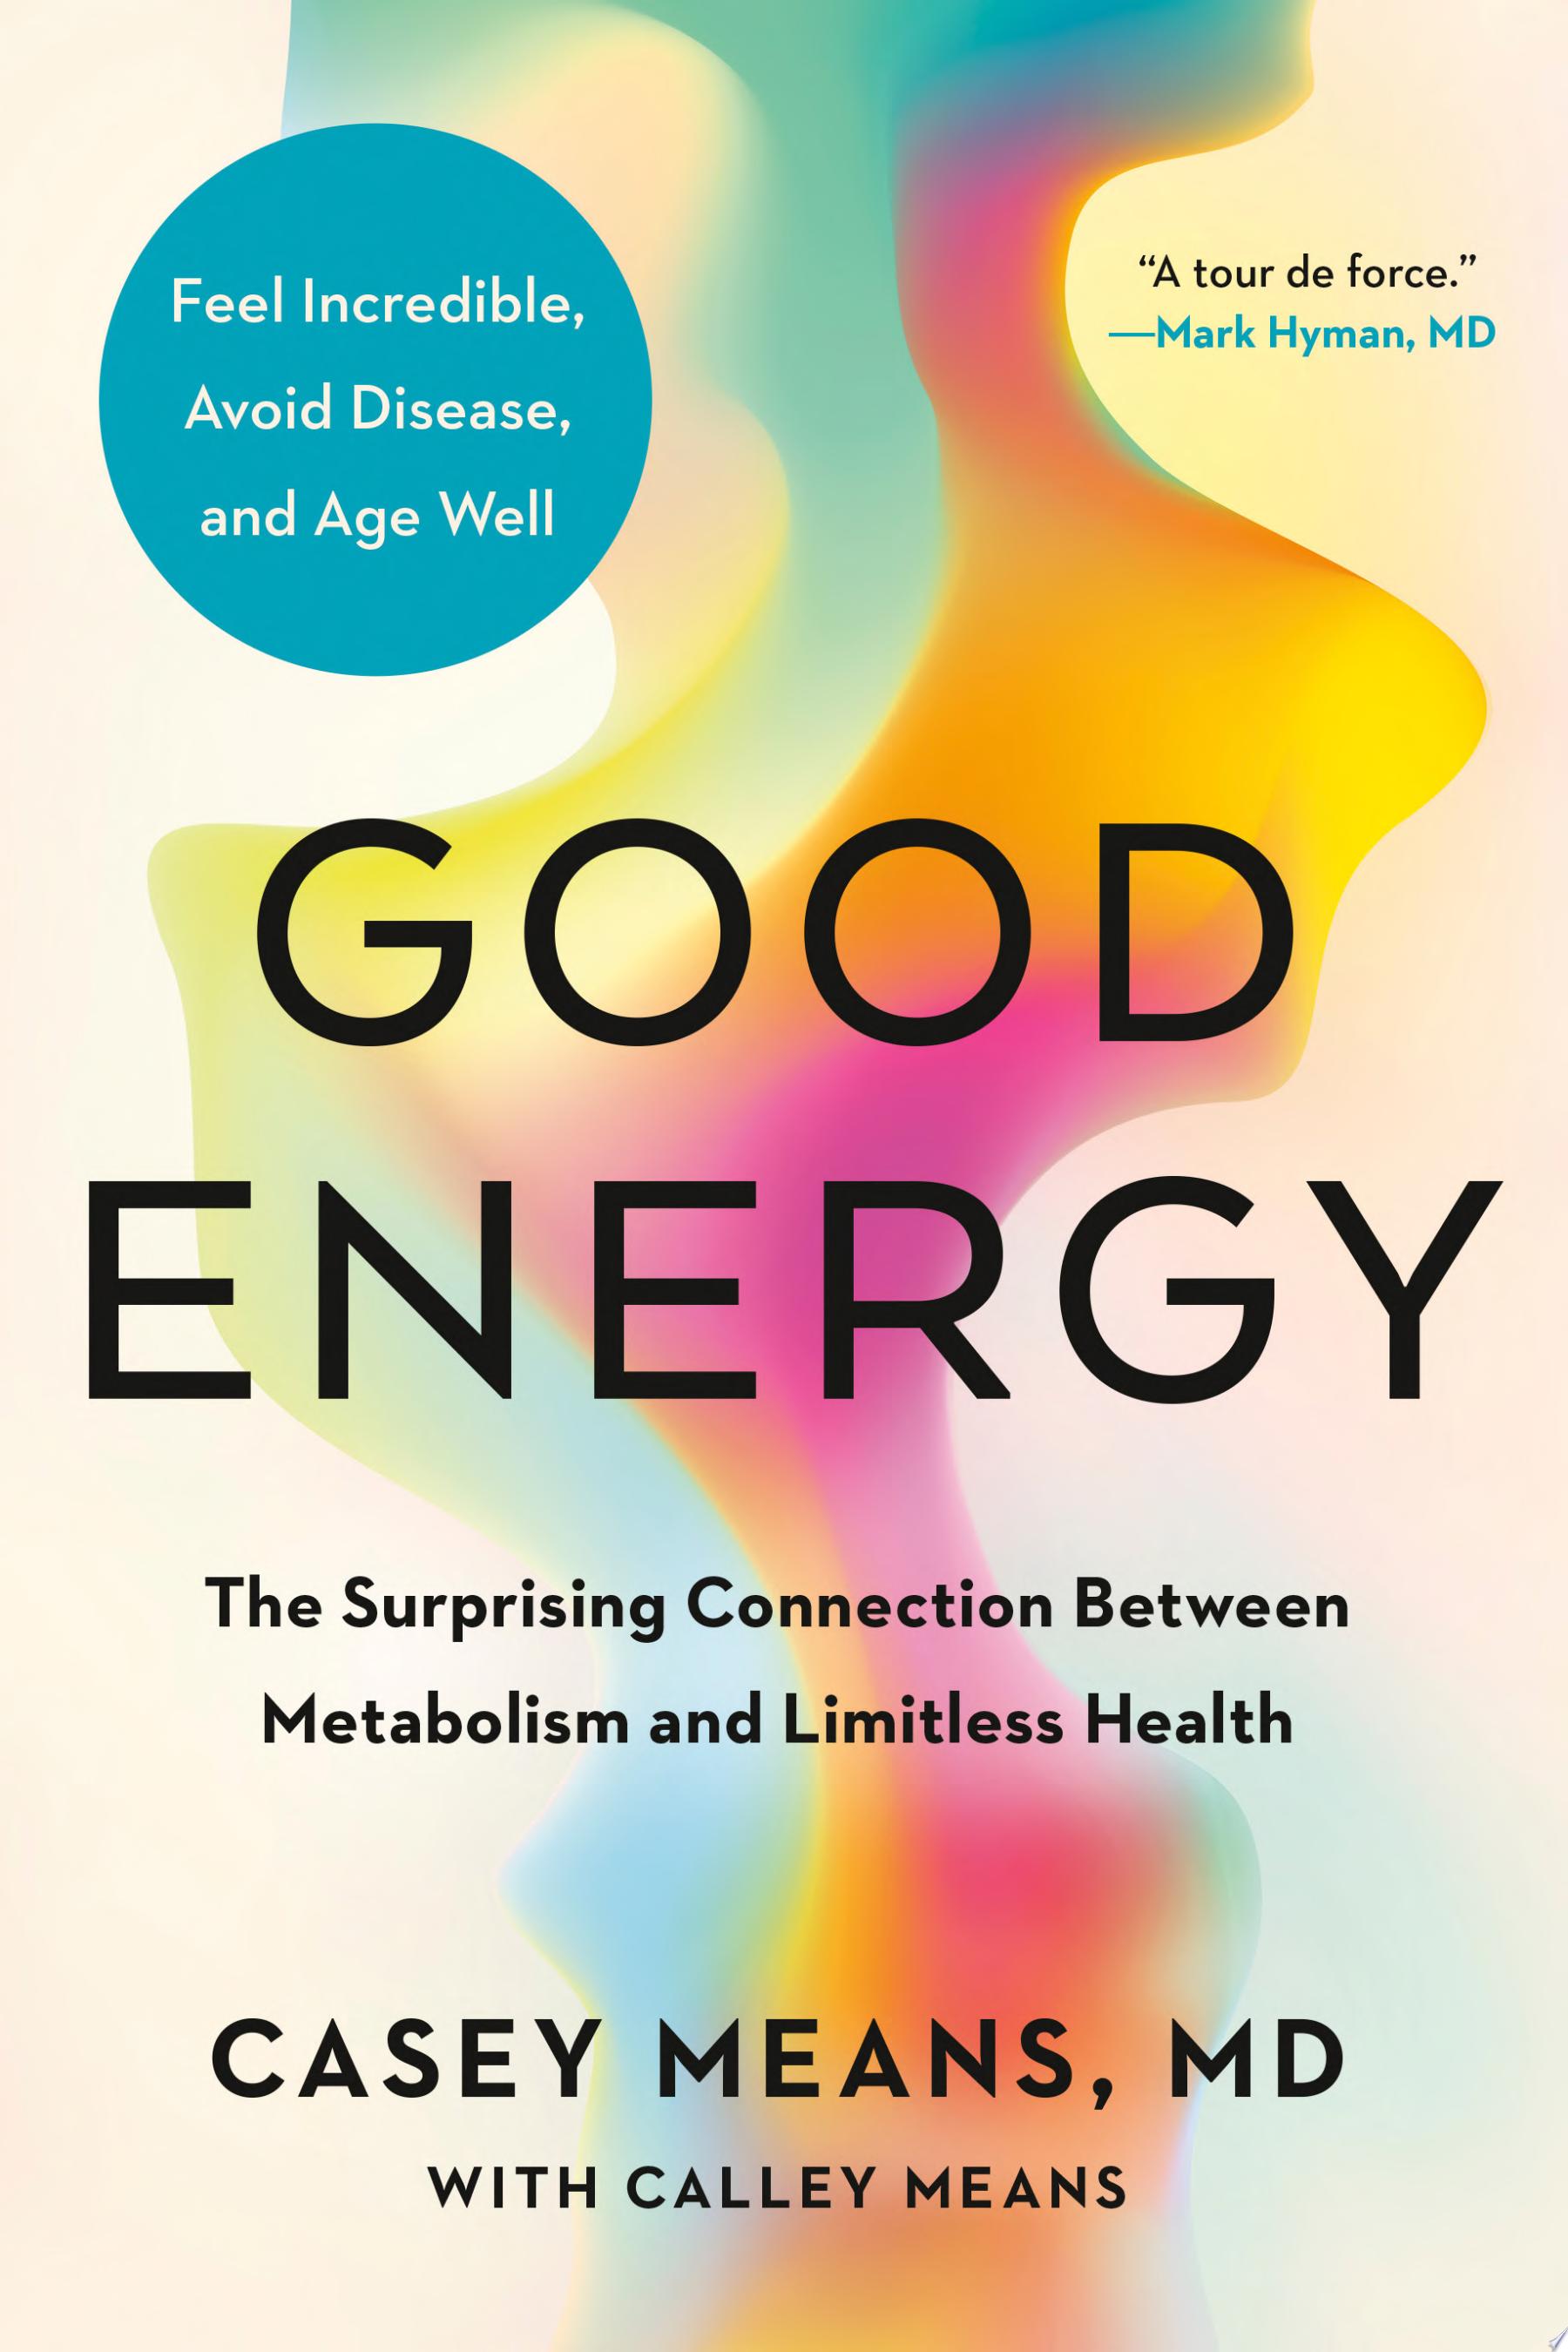 Image for "Good Energy"